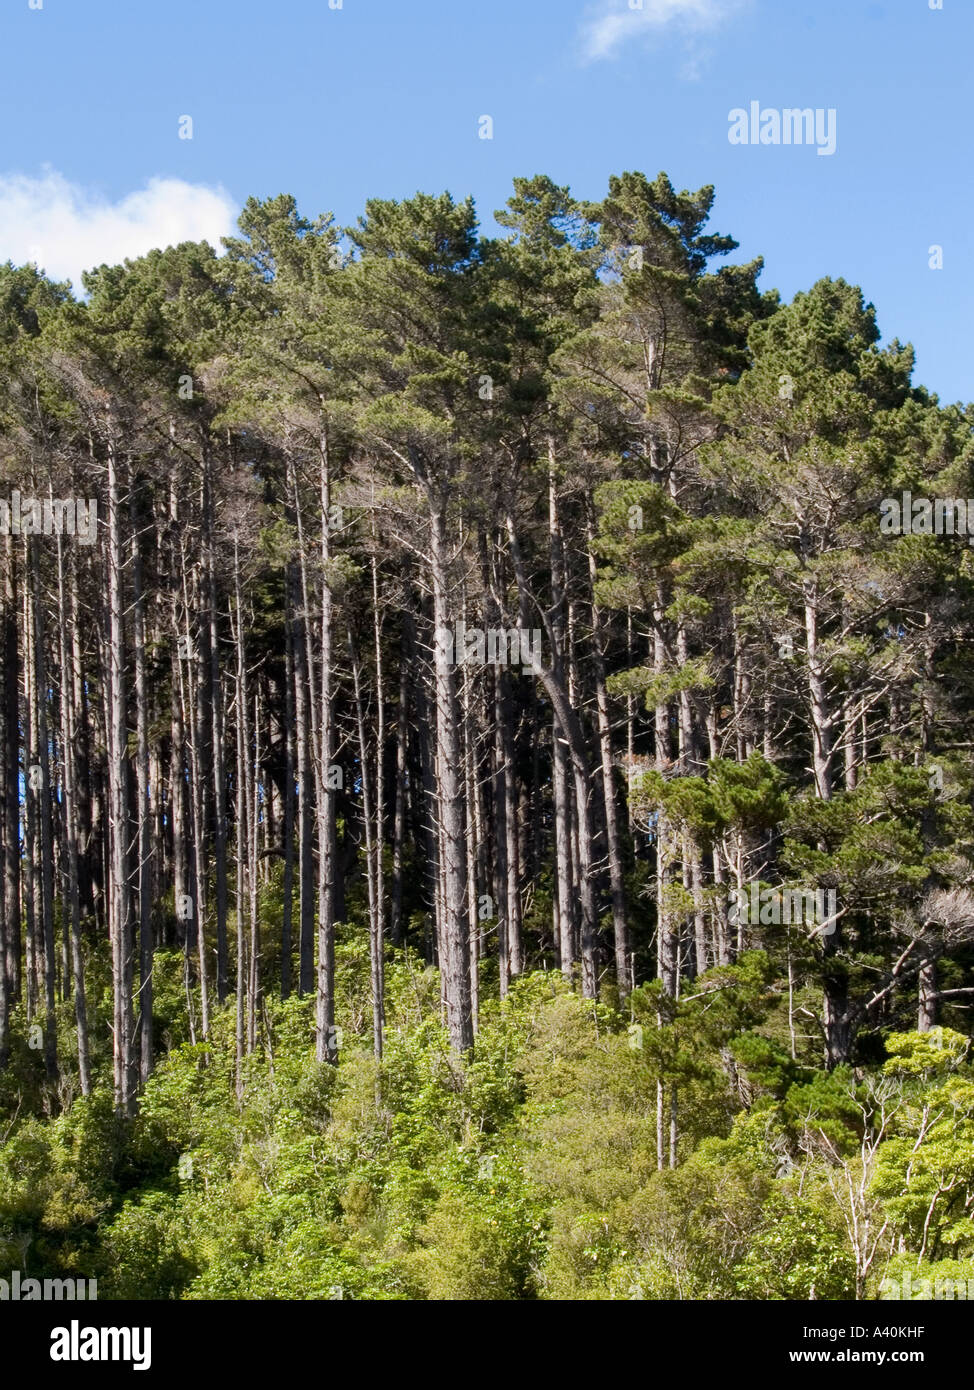 Forest of Pinus radiata conifer trees pine tree or Monterey pines with  undergrowth against a blue sky backdrop Stock Photo - Alamy